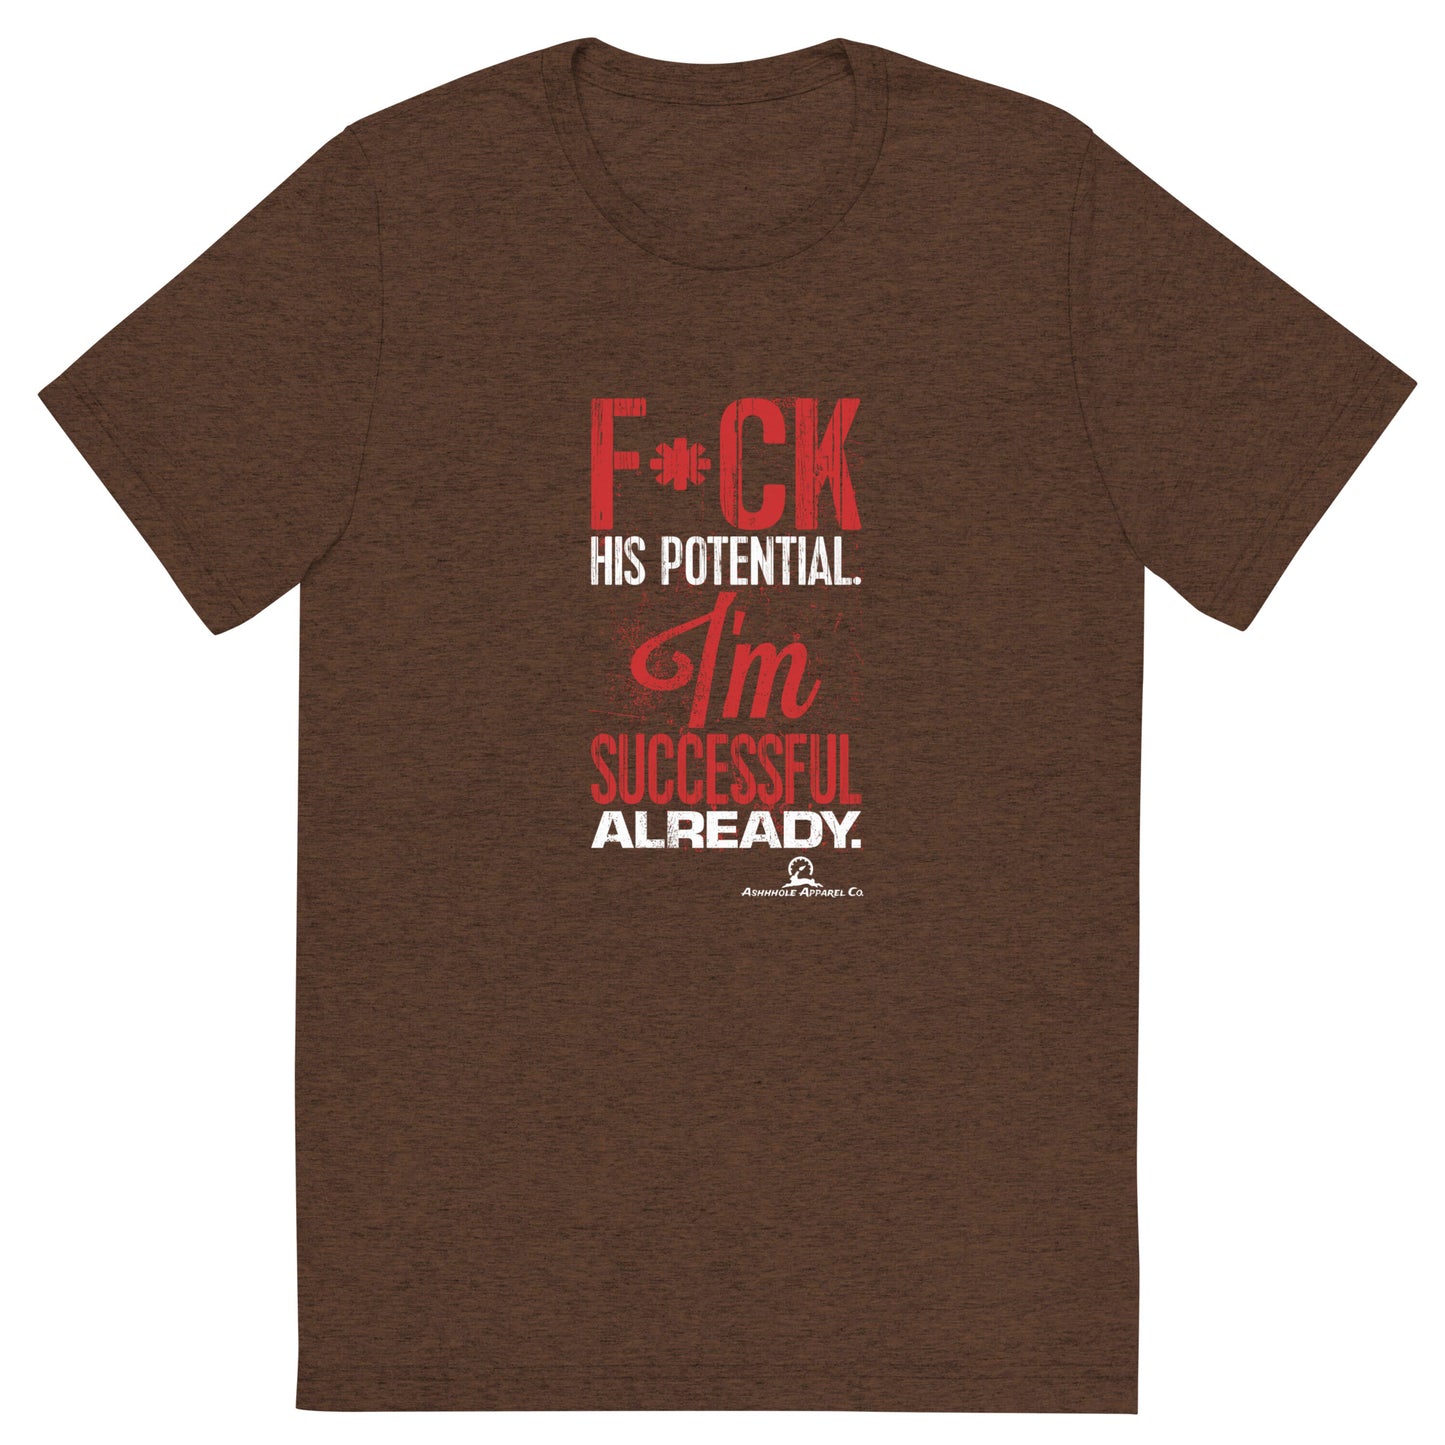 "F*** HIS POTENTIAL..." Short sleeve t-shirt